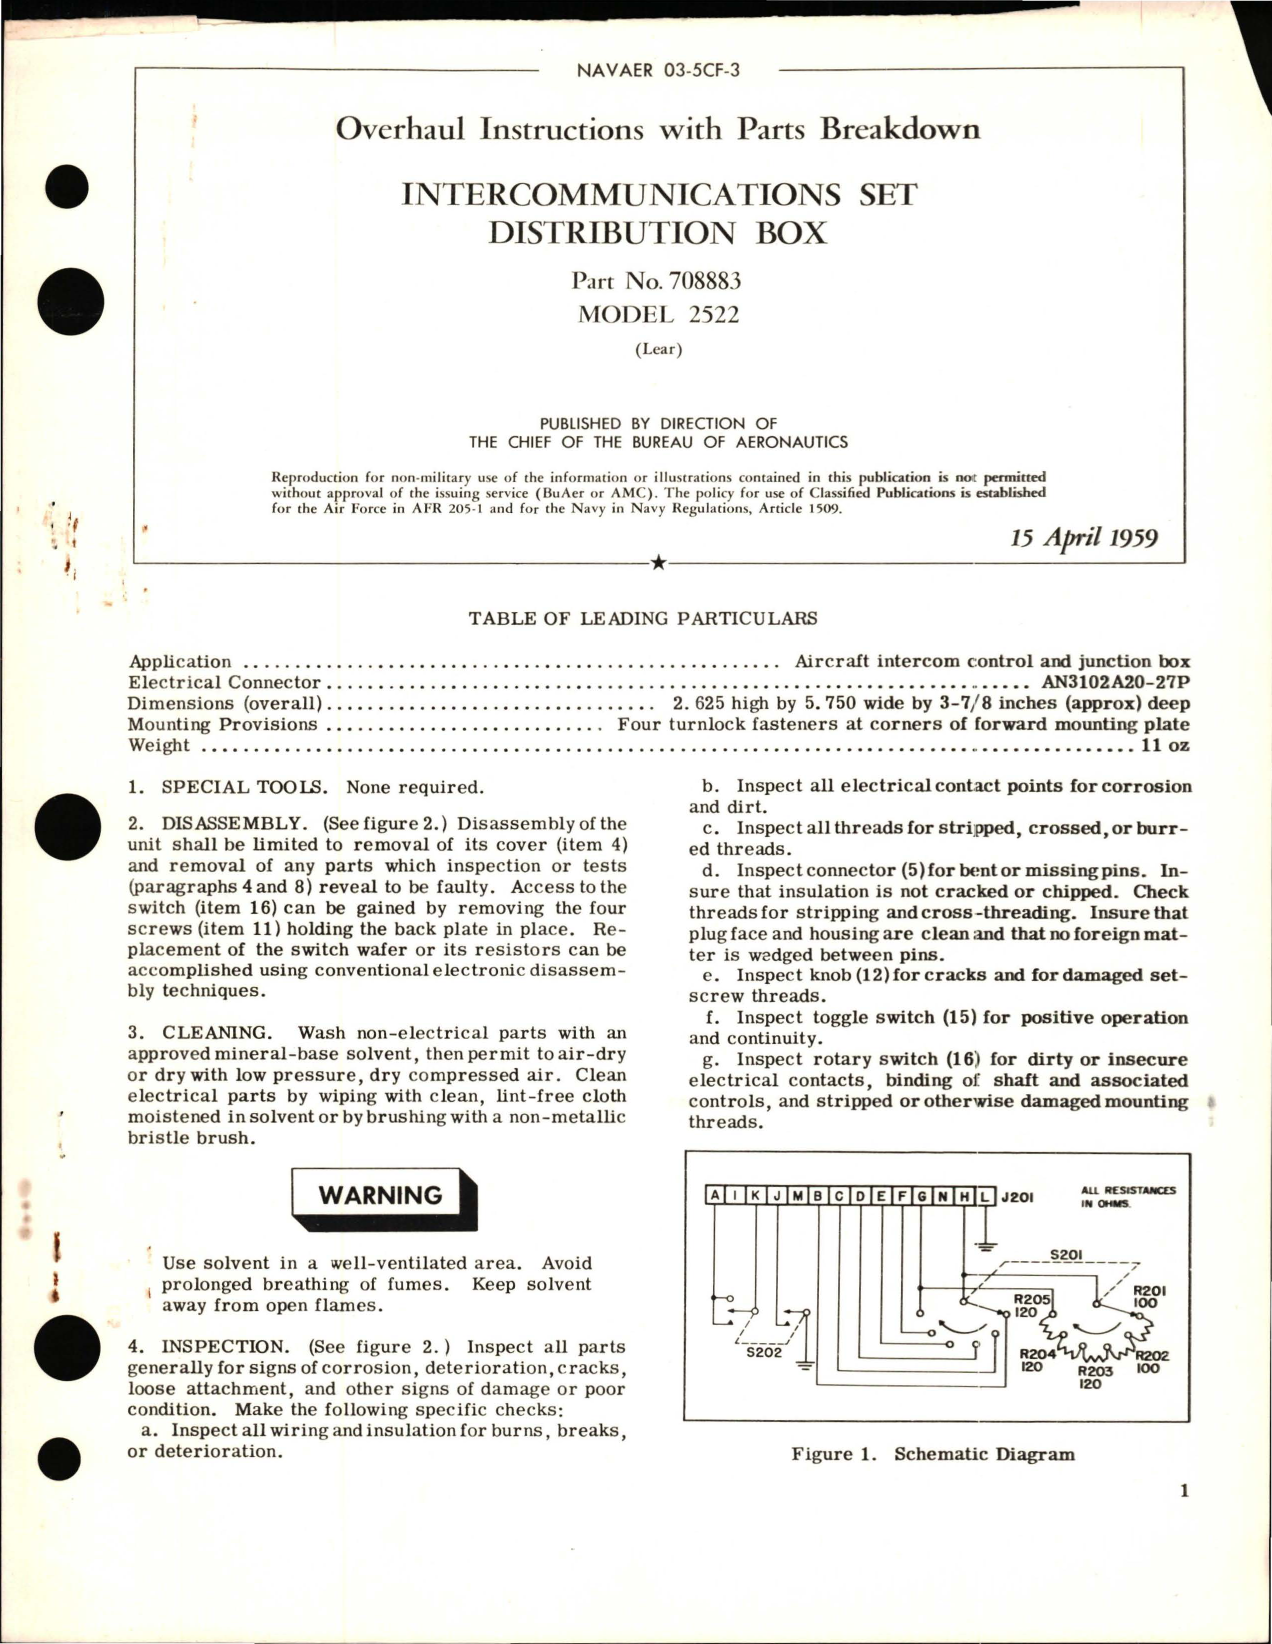 Sample page 1 from AirCorps Library document: Overhaul Instructions with Parts Breakdown for Intercommunications Set Distribution Box - Part 708883 - Model 2522 